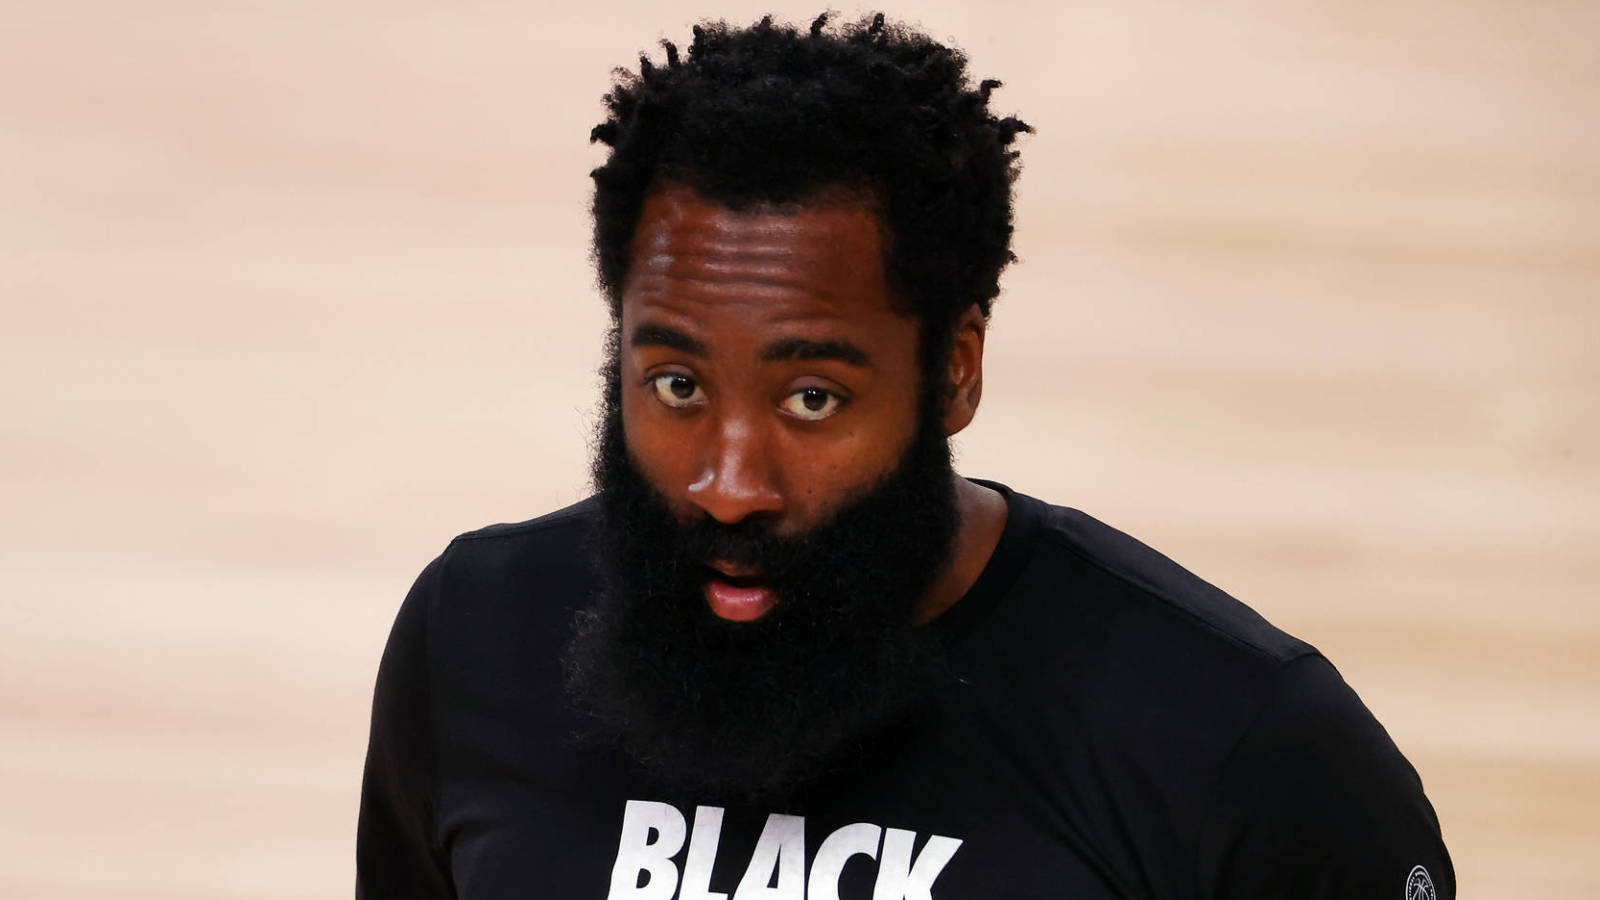 James Harden was at rapper’s birthday party instead of Rockets workouts